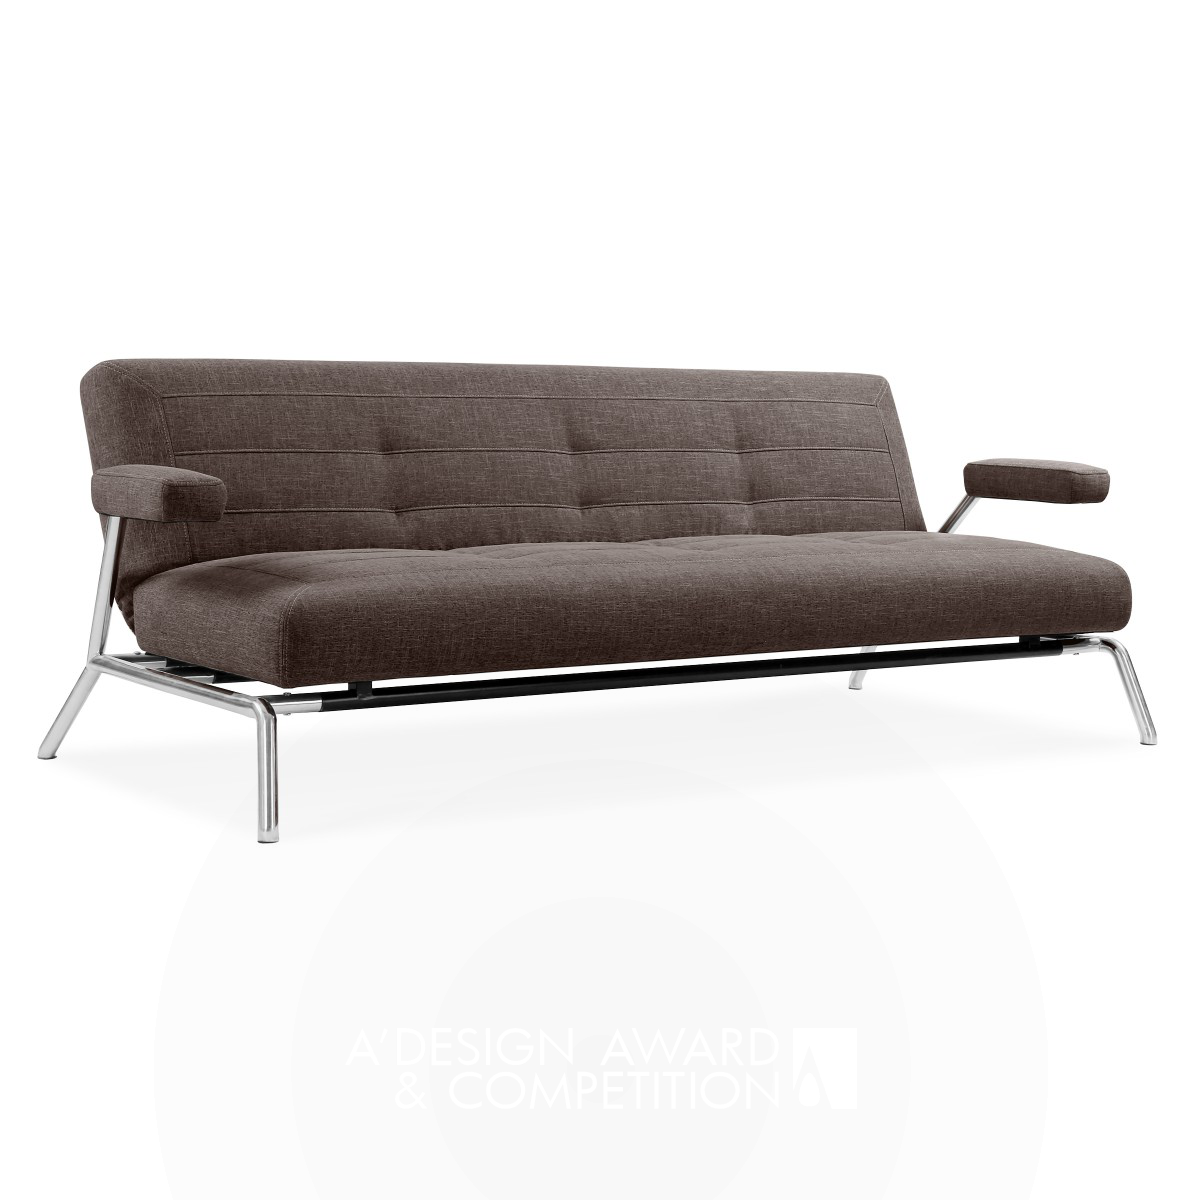 Umea  Sofa Bed by Claudio Sibille